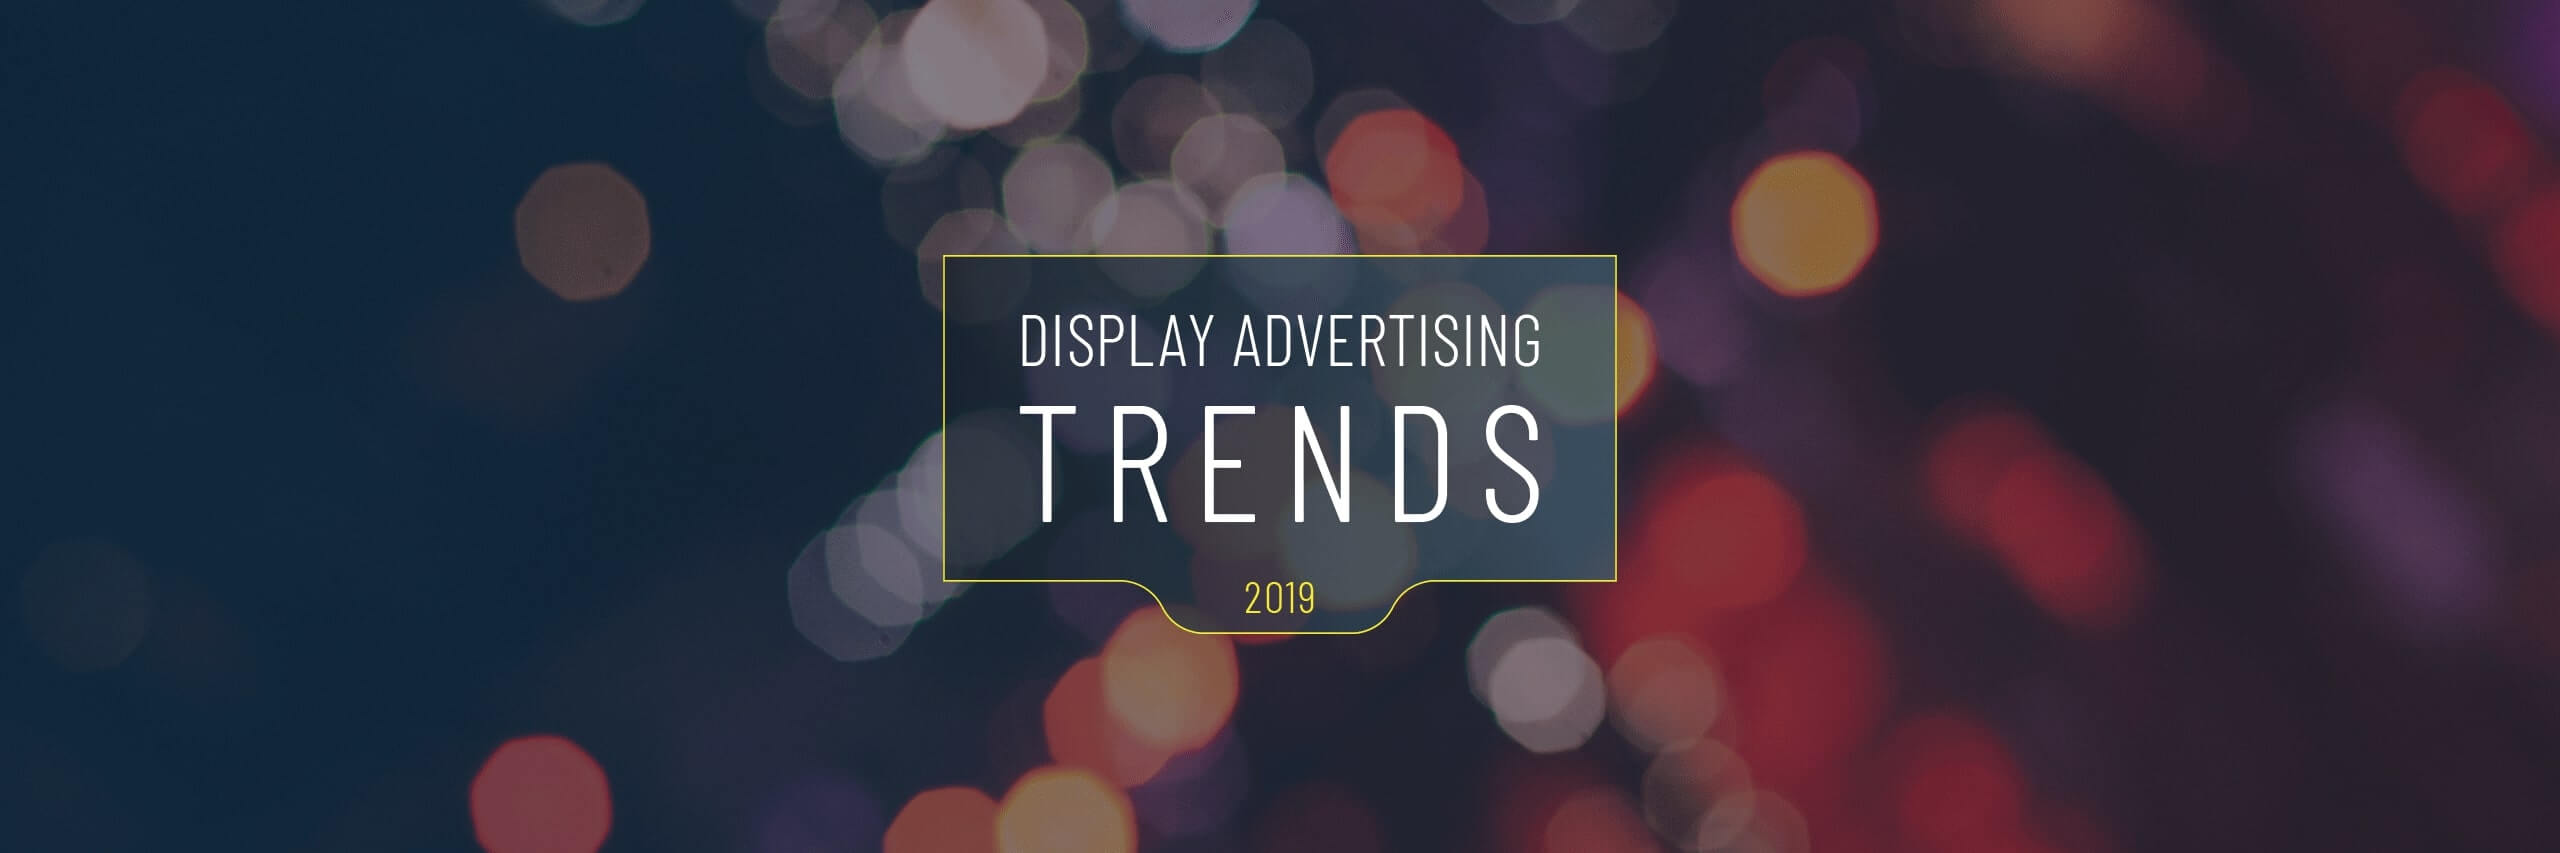 Display advertising trends: The 2019 infographic